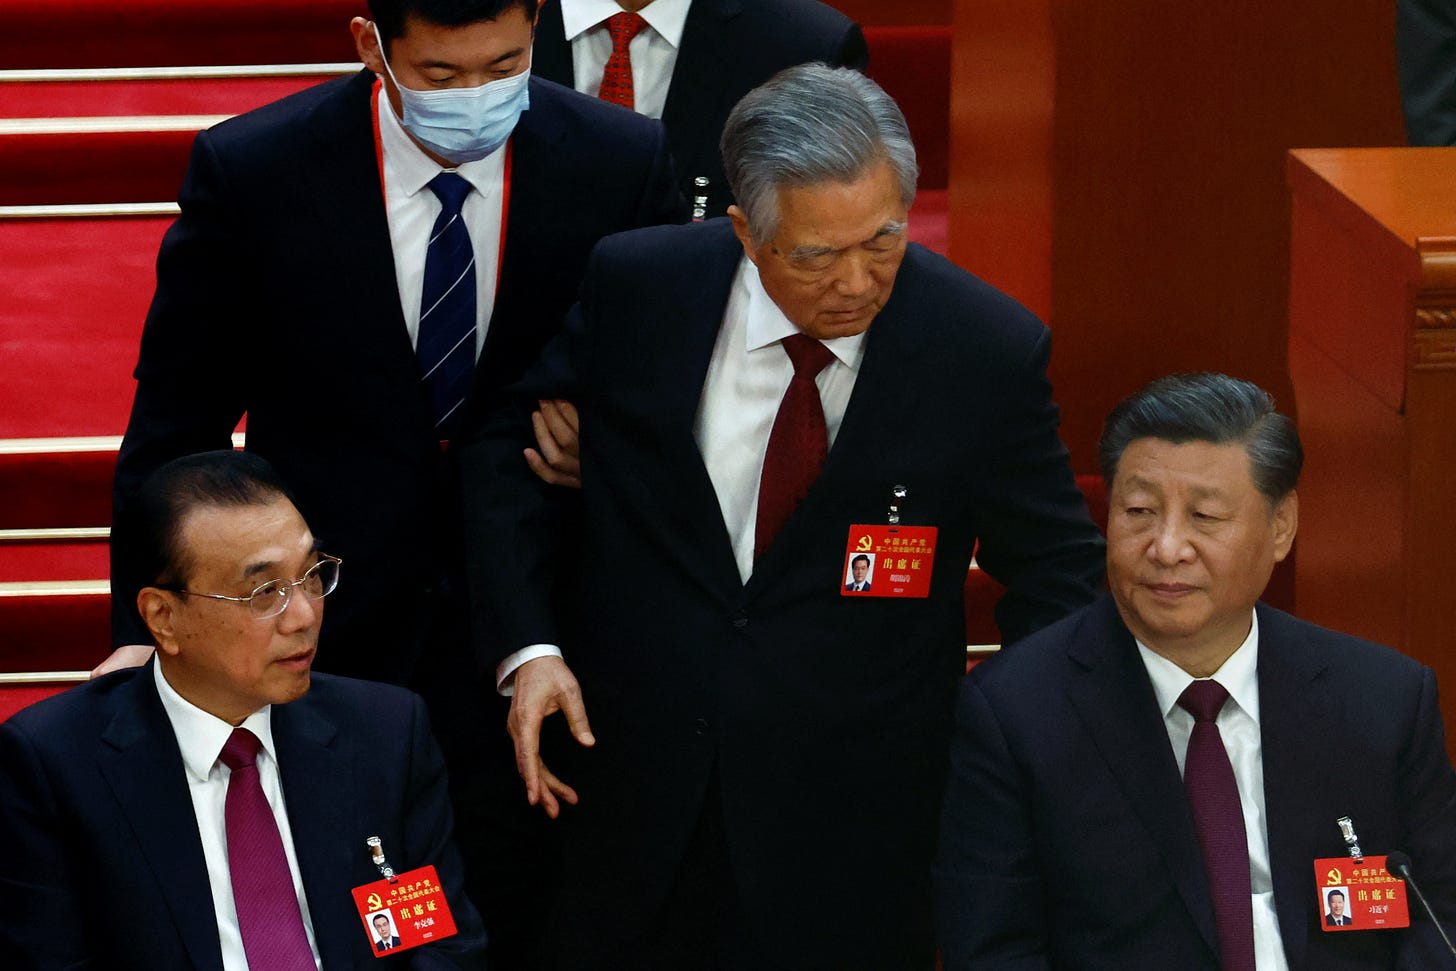 https://www.abc.net.au/news/2022-10-22/hu-jintao-chinese-ex-president-escorted-out-of-party-congress/101566426